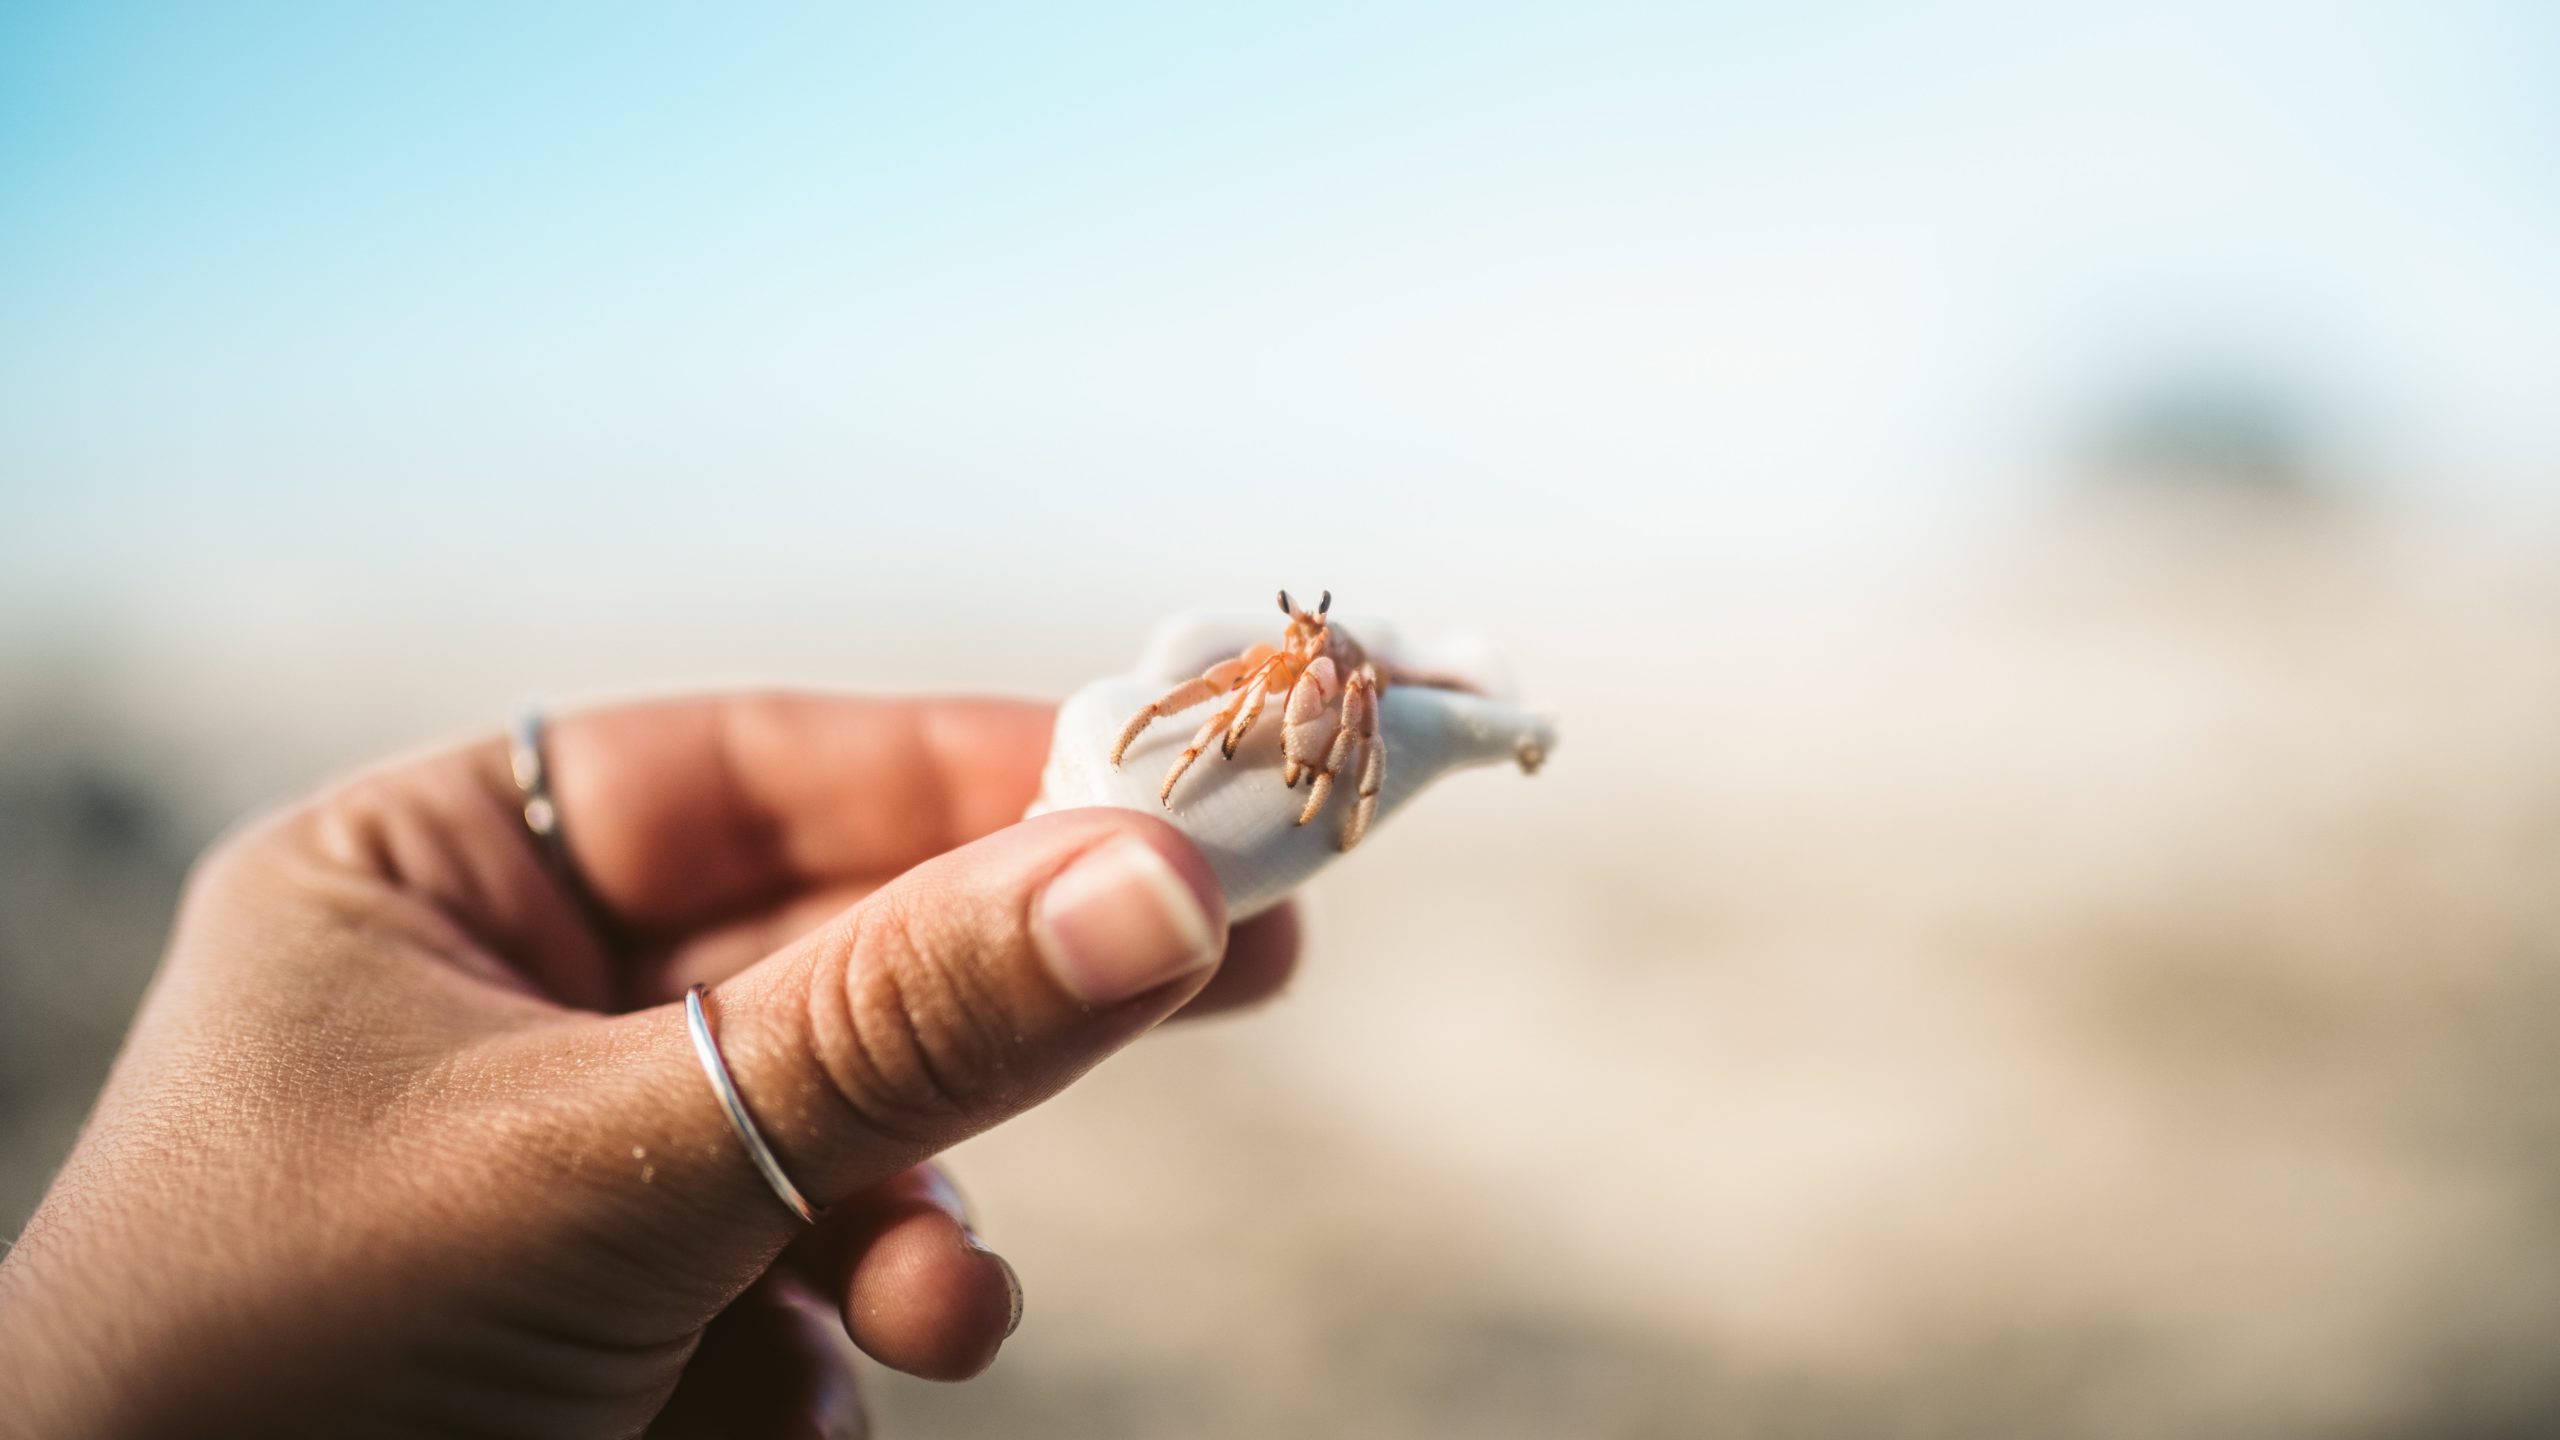 ocean sciences meeting: hand holding a sand crab